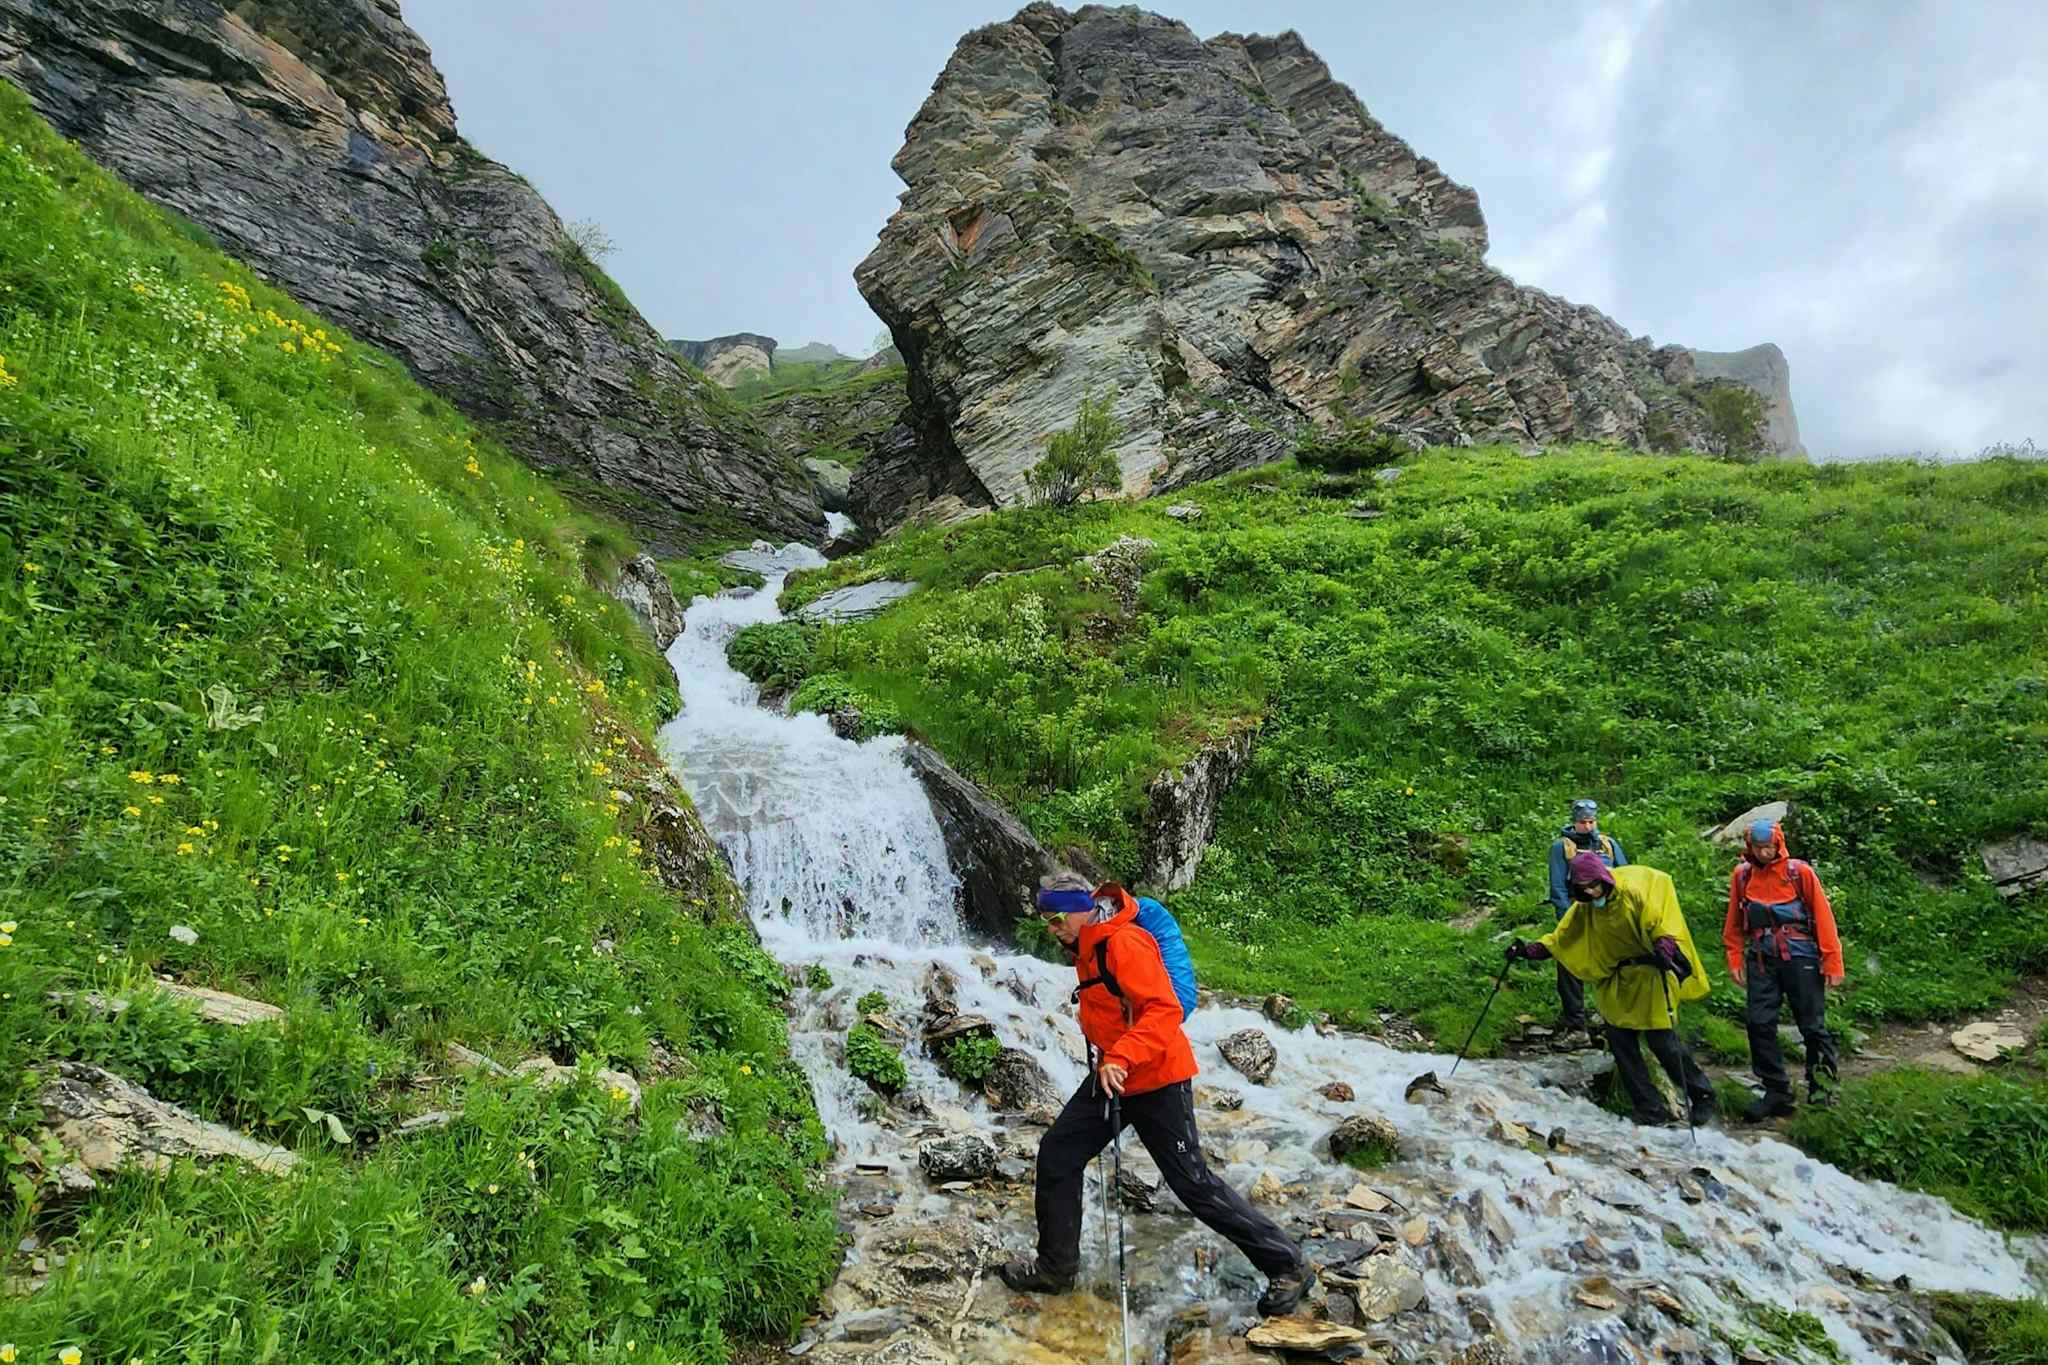 Crossing waterfalls in the Sharr Mountains. Photo Host Butterfly Outdoor Adventure